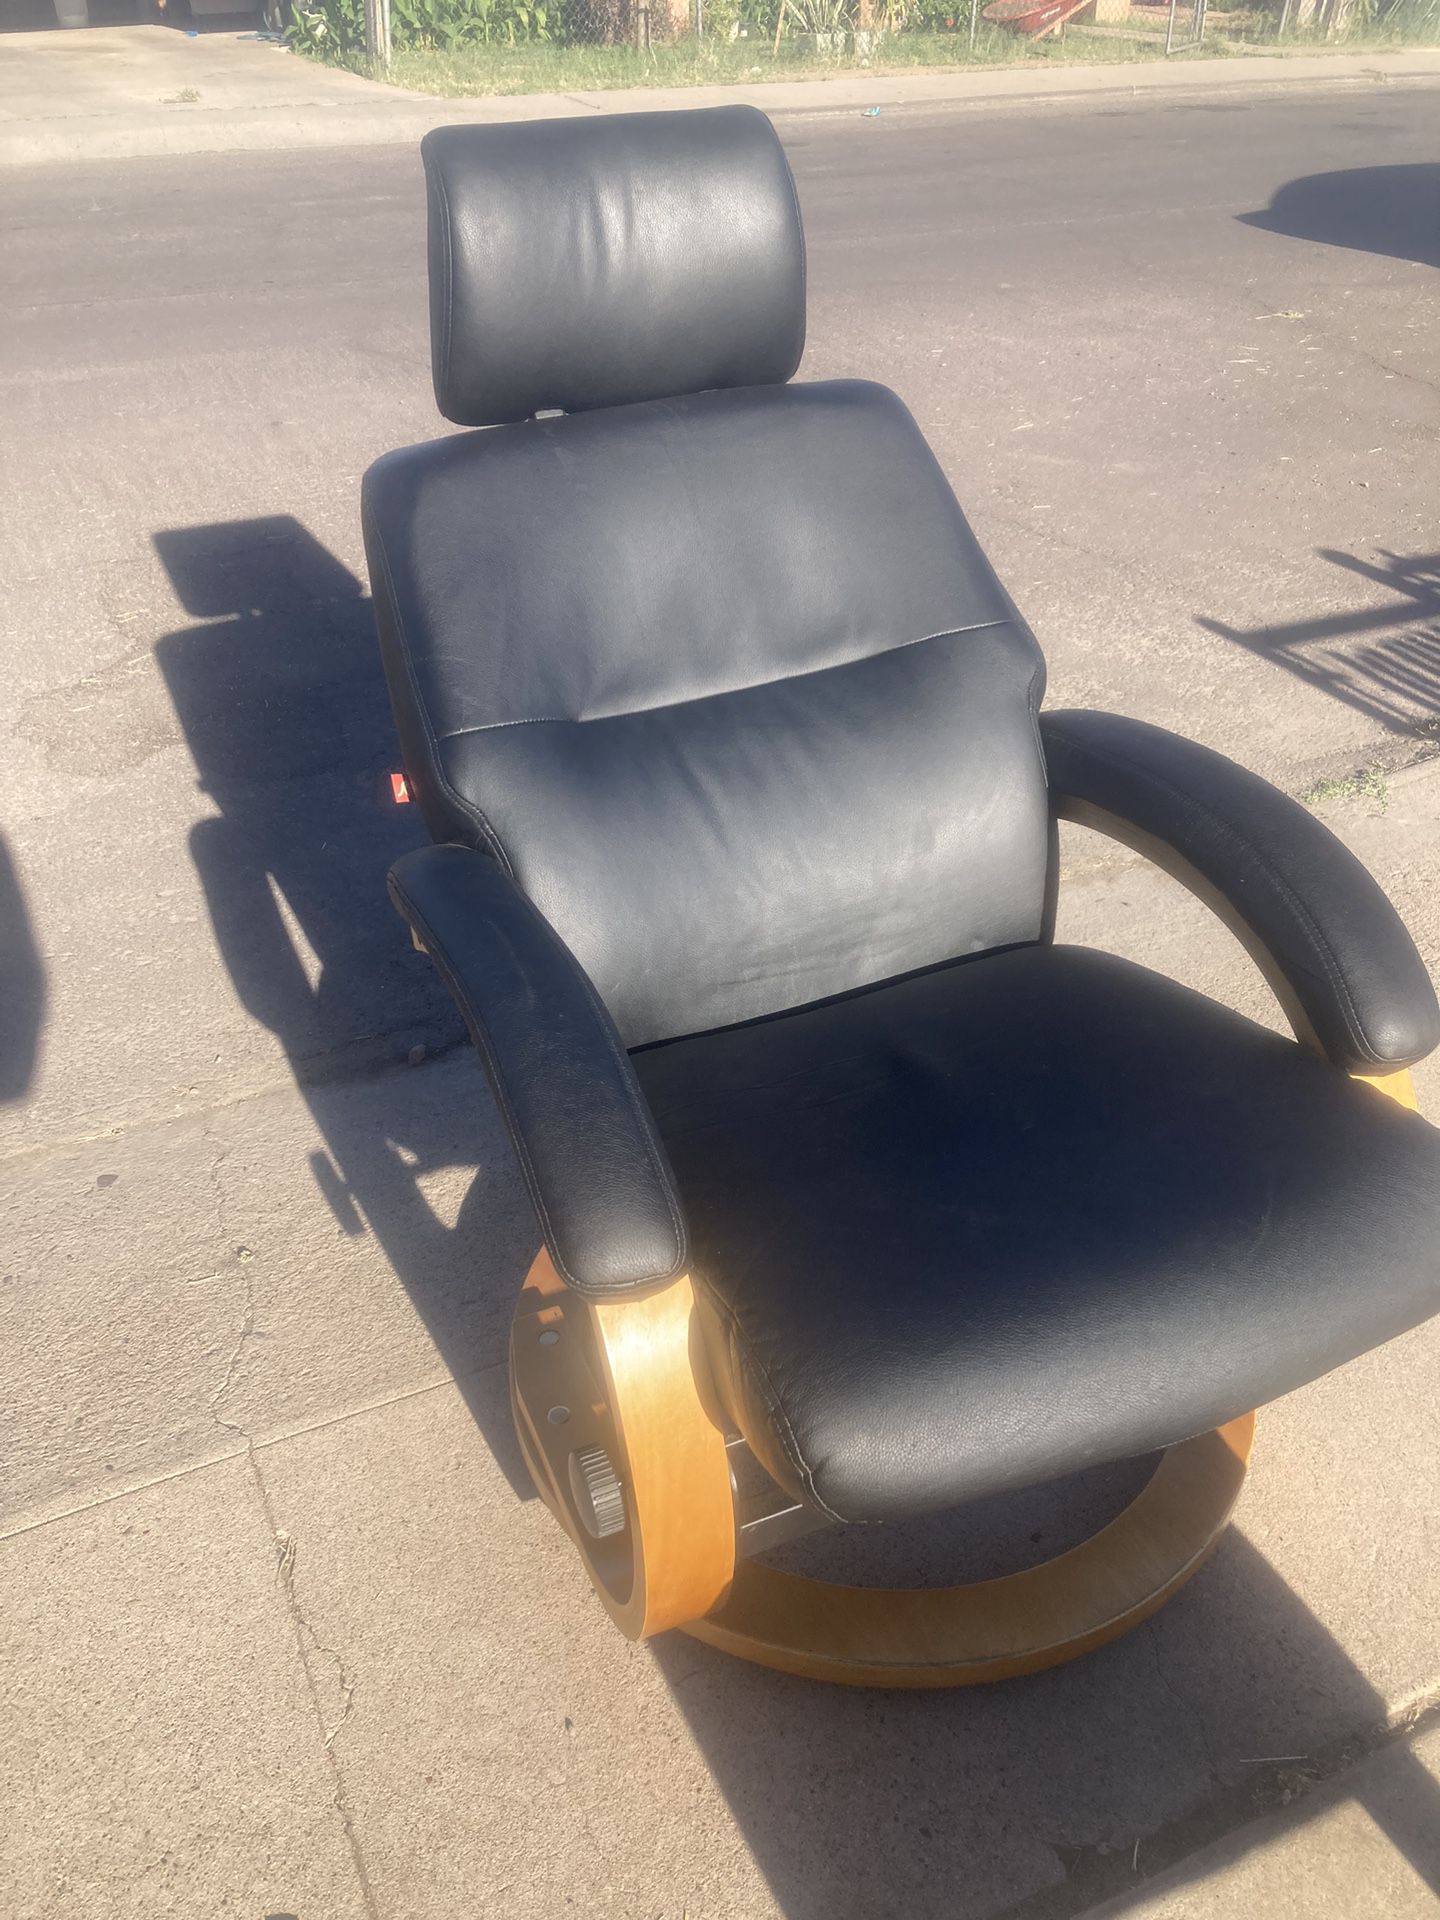 Black Leather Reclining Chair